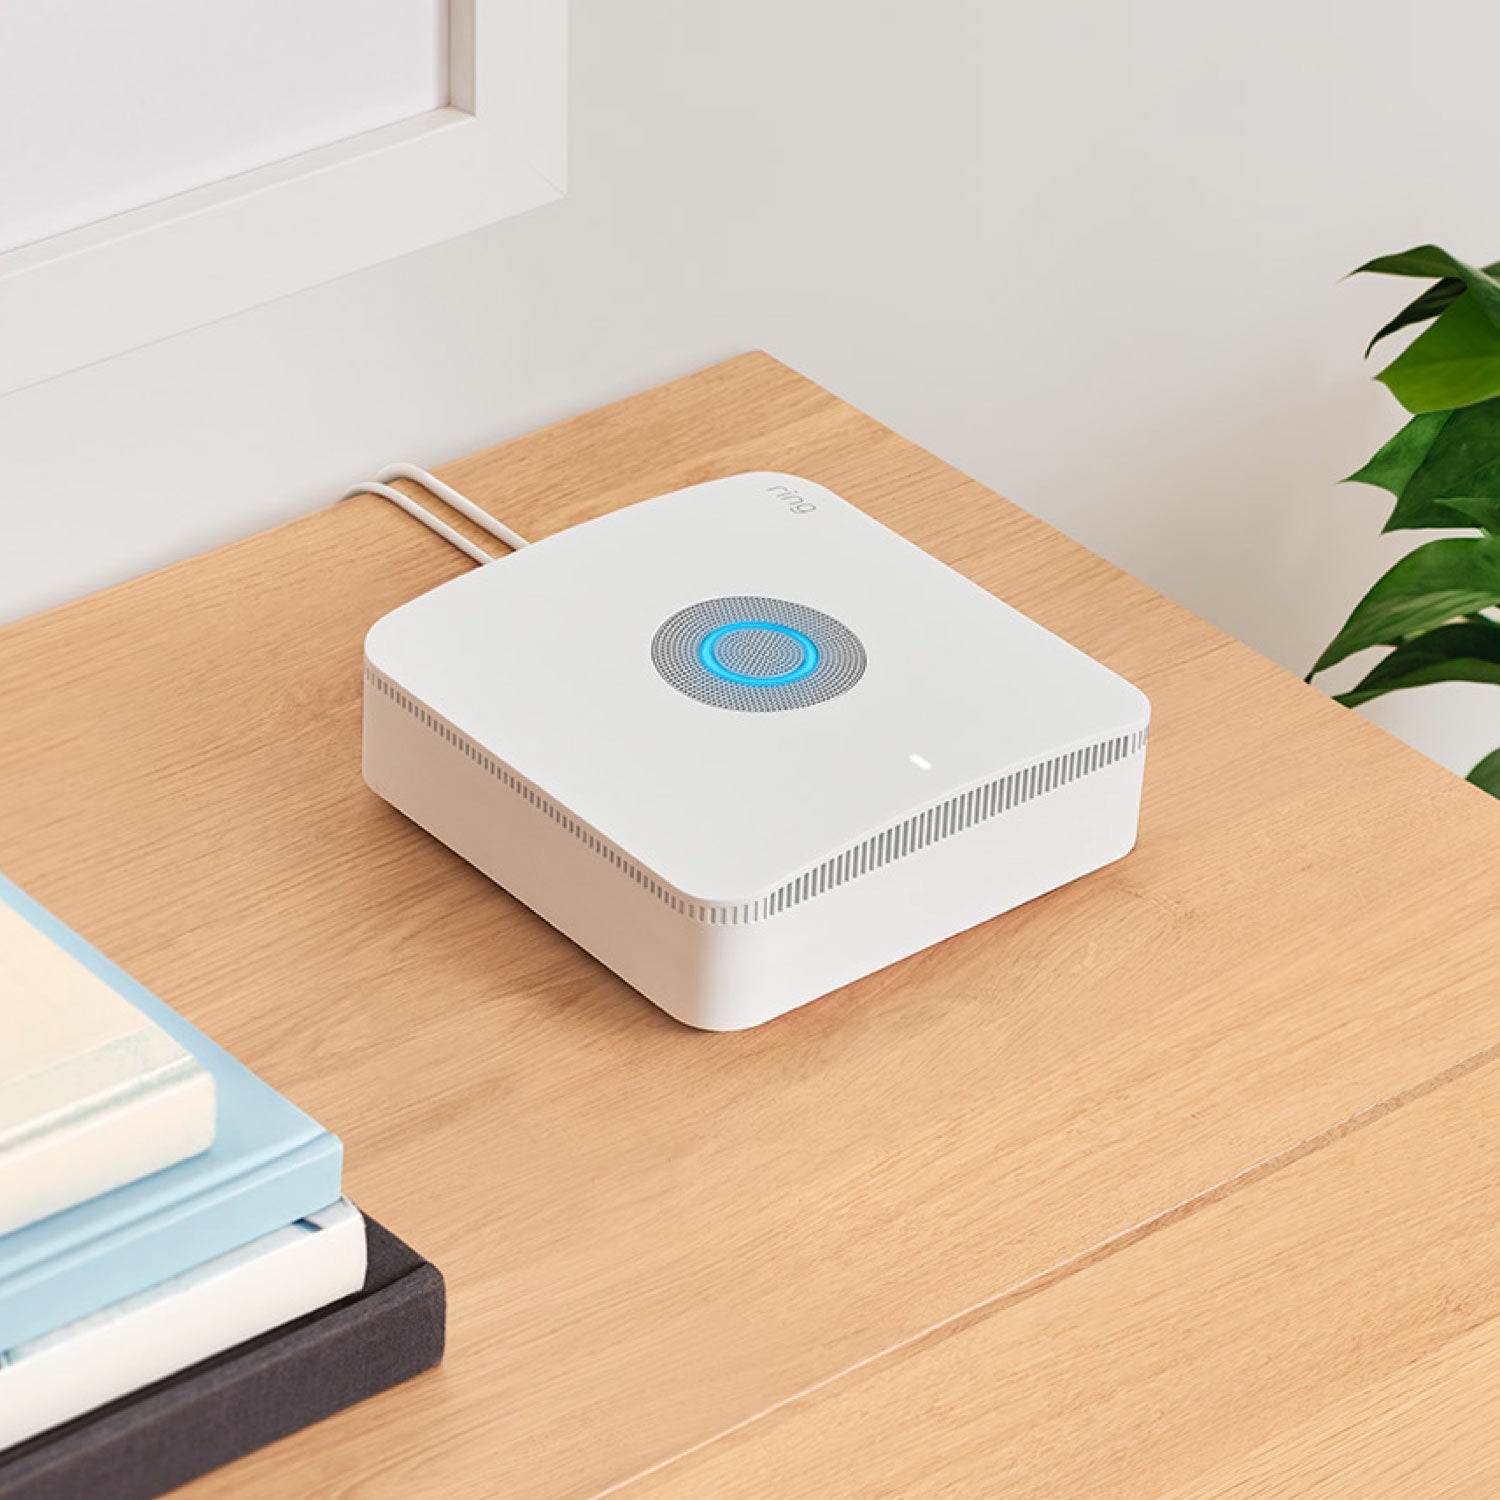 Alarm Pro, 13-Piece Kit (with built-in eero Wi-Fi 6 router and additional eero 6 Wi-Fi Router) - Alarm Pro Base Station situated on wooden desktop next to some books.